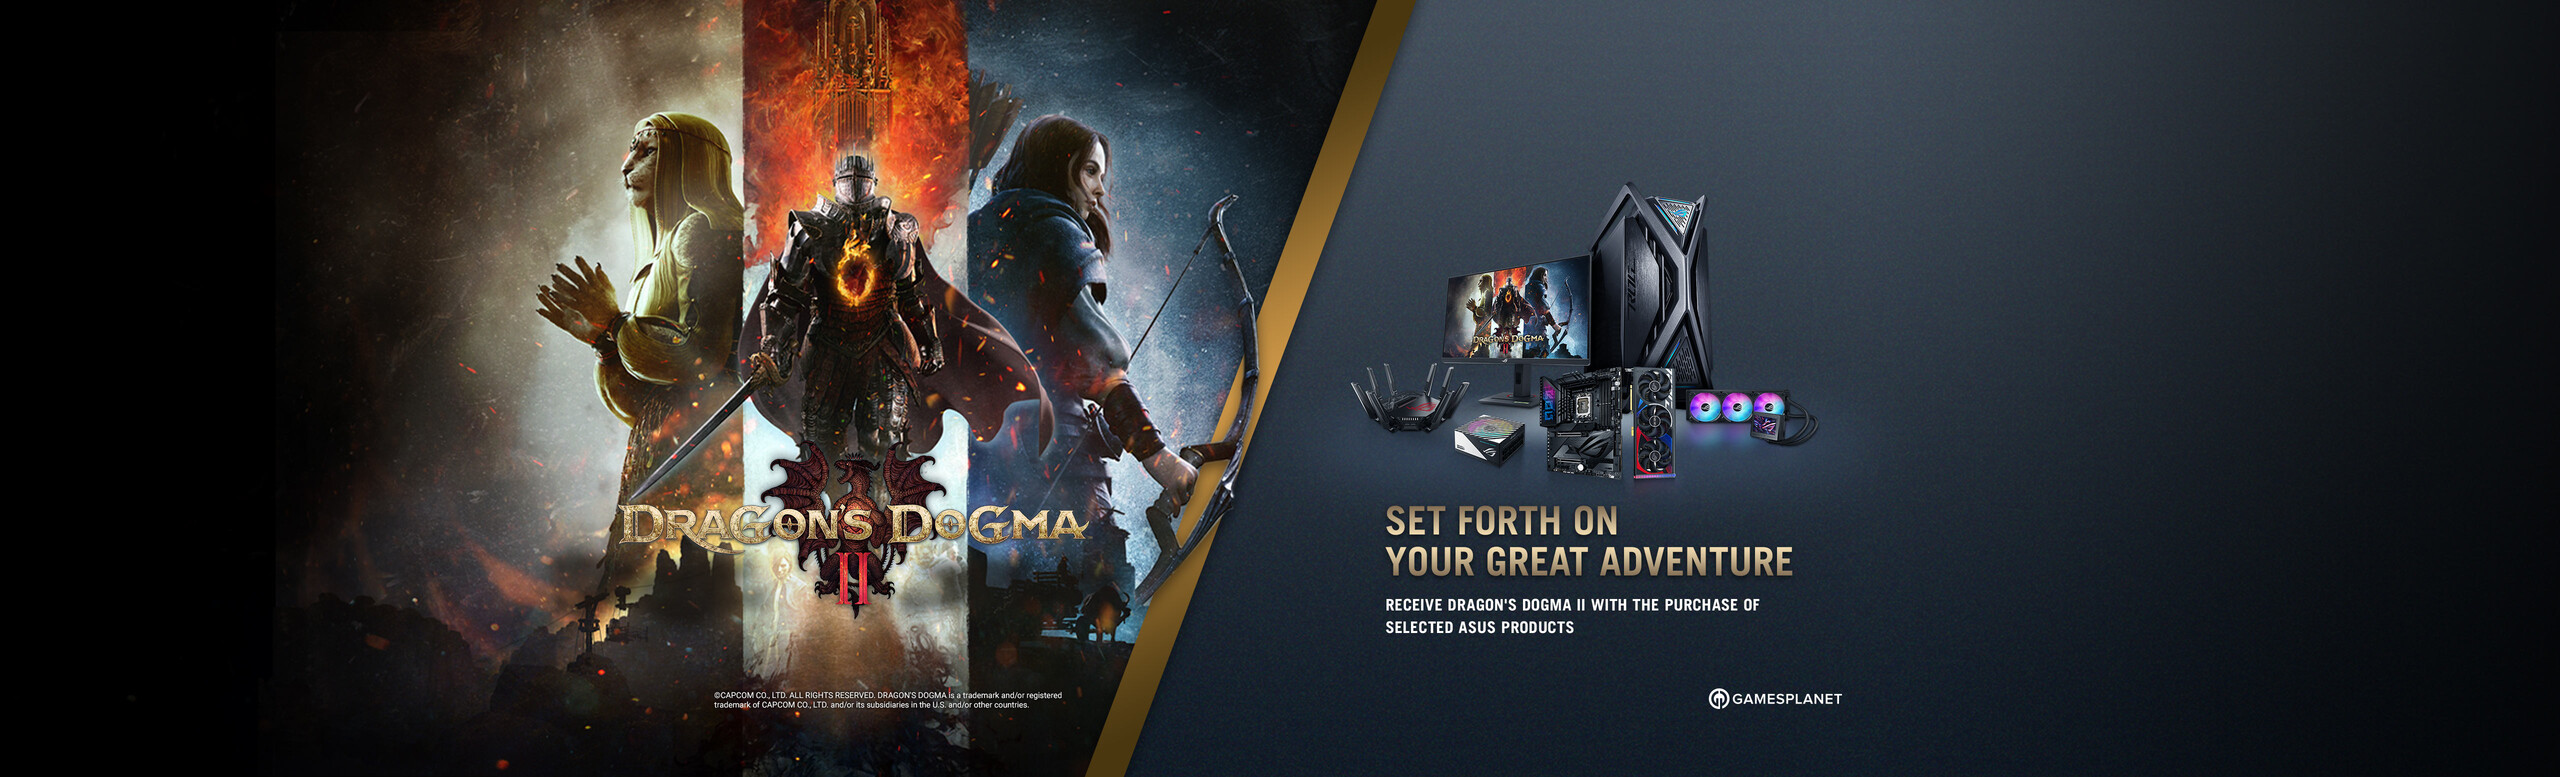 Buy eligible ASUS products and receive Dragon's Dogma II!